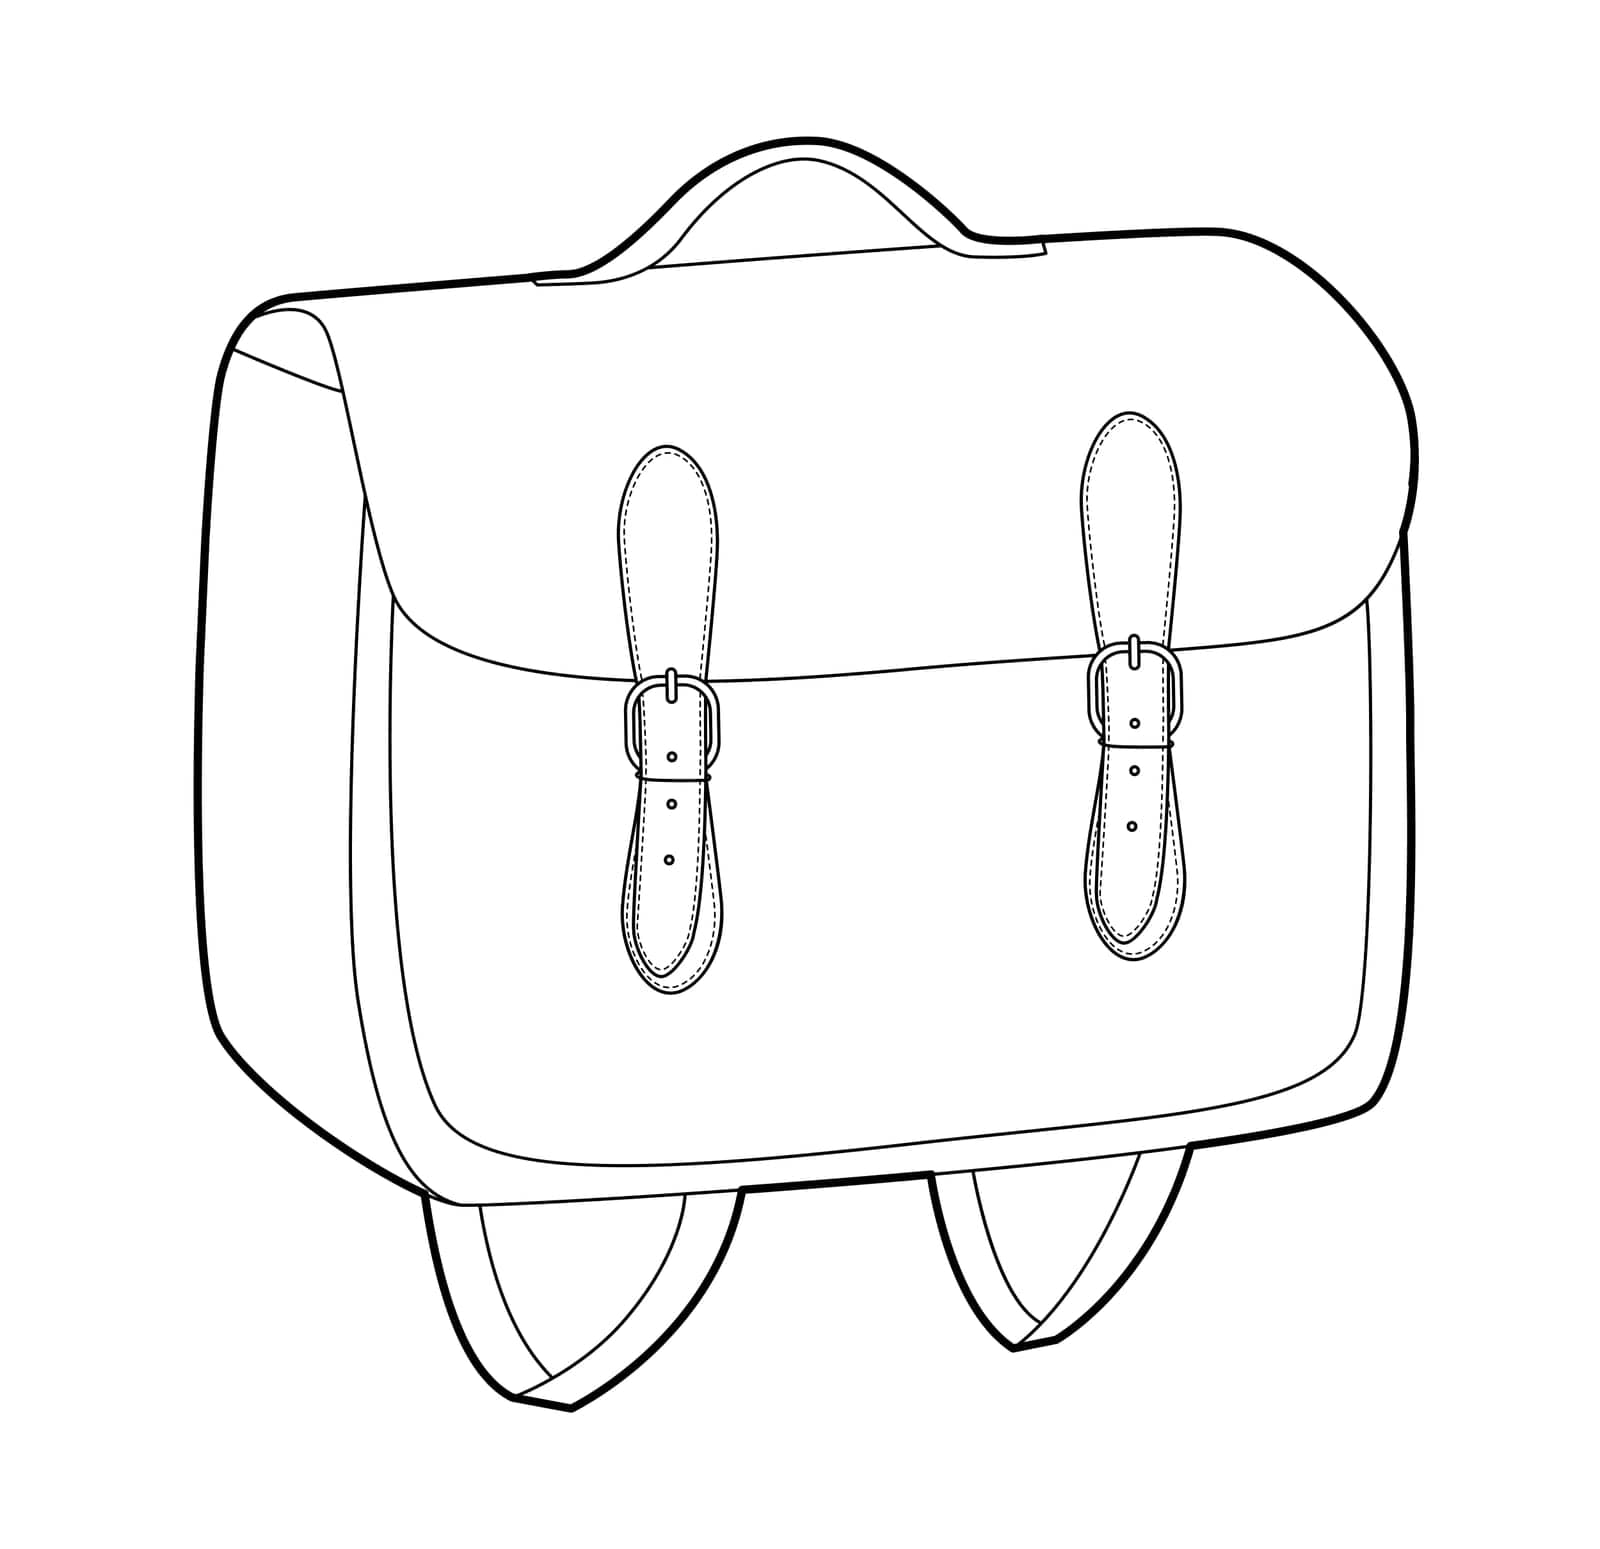 Preppy Backpack backpack silhouette satchel bag. Fashion accessory technical illustration. Vector schoolbag 3-4 view for Men, women, unisex style, flat handbag CAD mockup sketch outline isolated